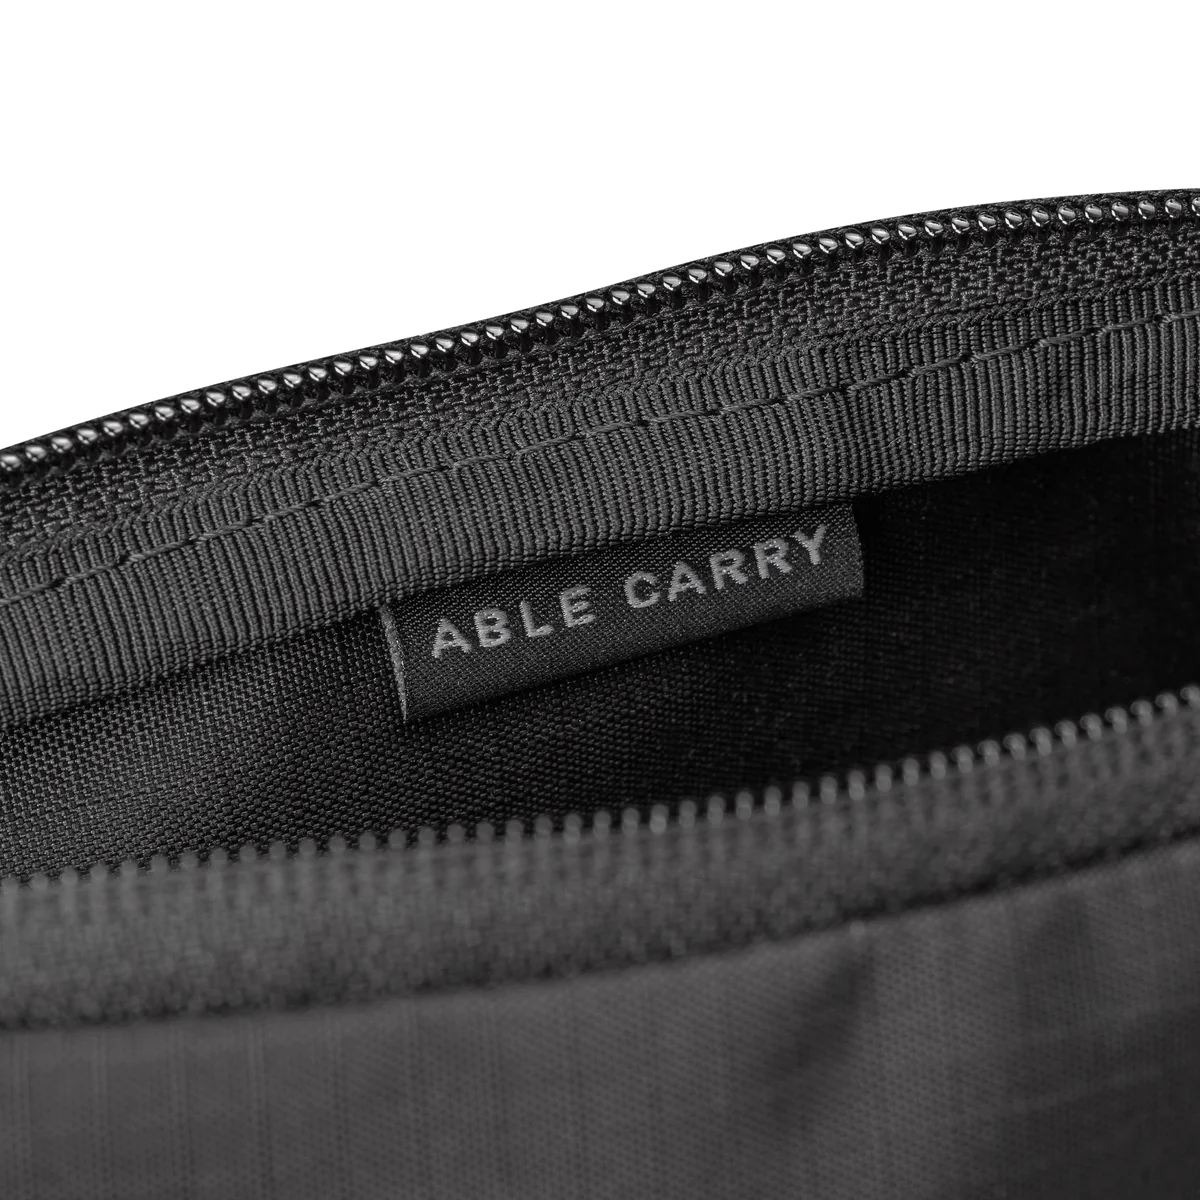 Able Carry - Stash Pouch